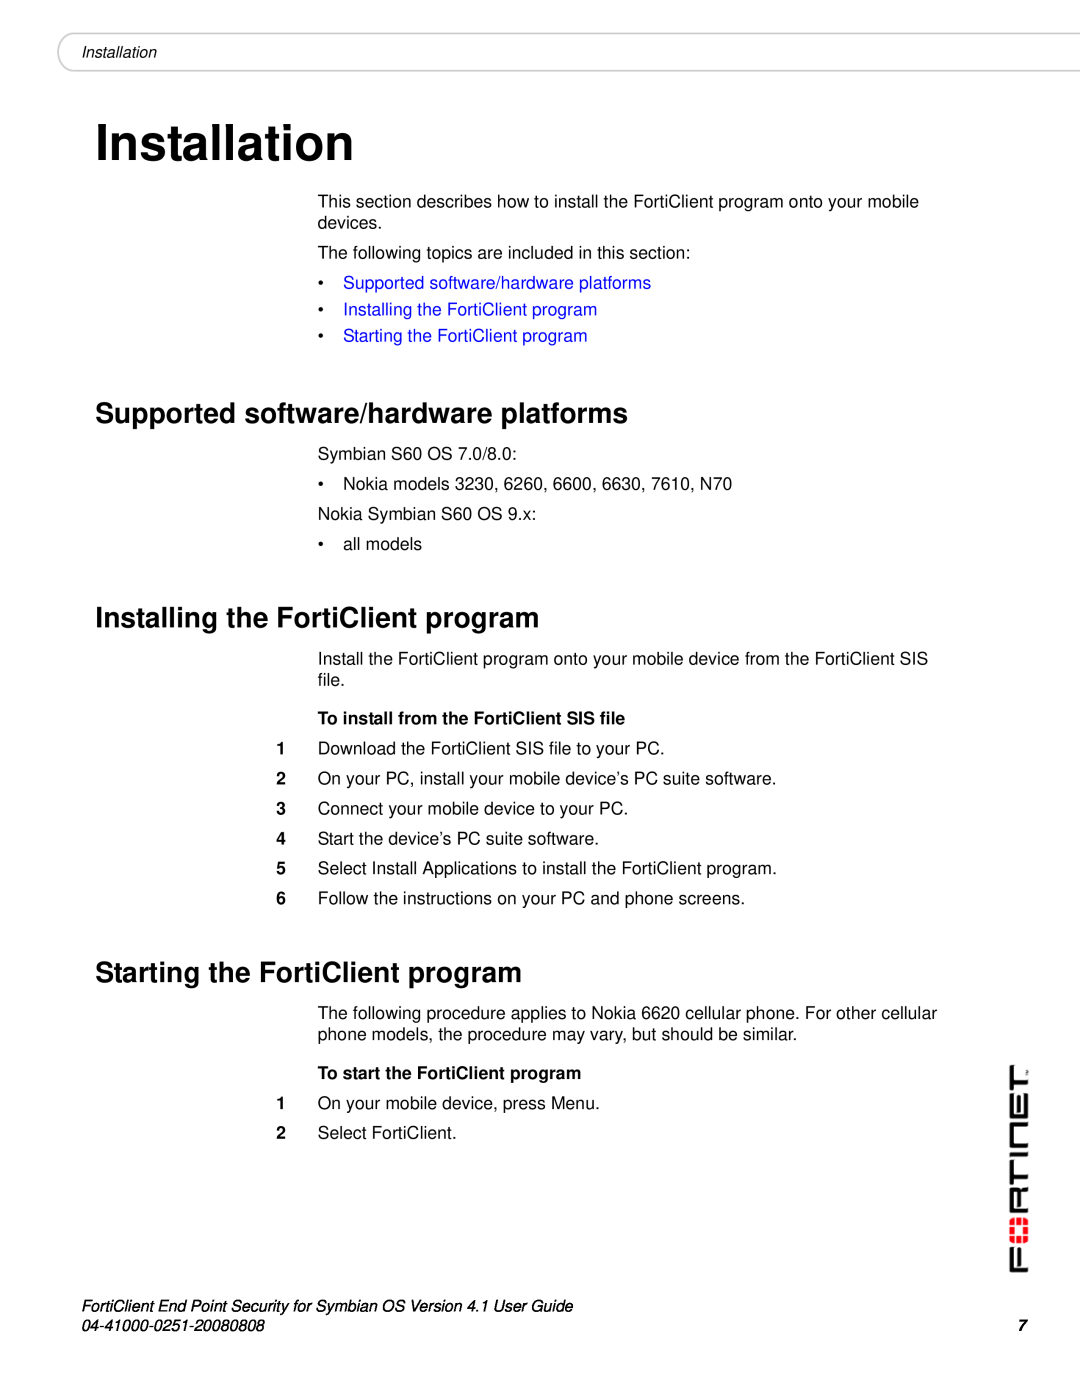 Fortinet Version 4.1 manual Installation, Supported software/hardware platforms, Installing the FortiClient program 